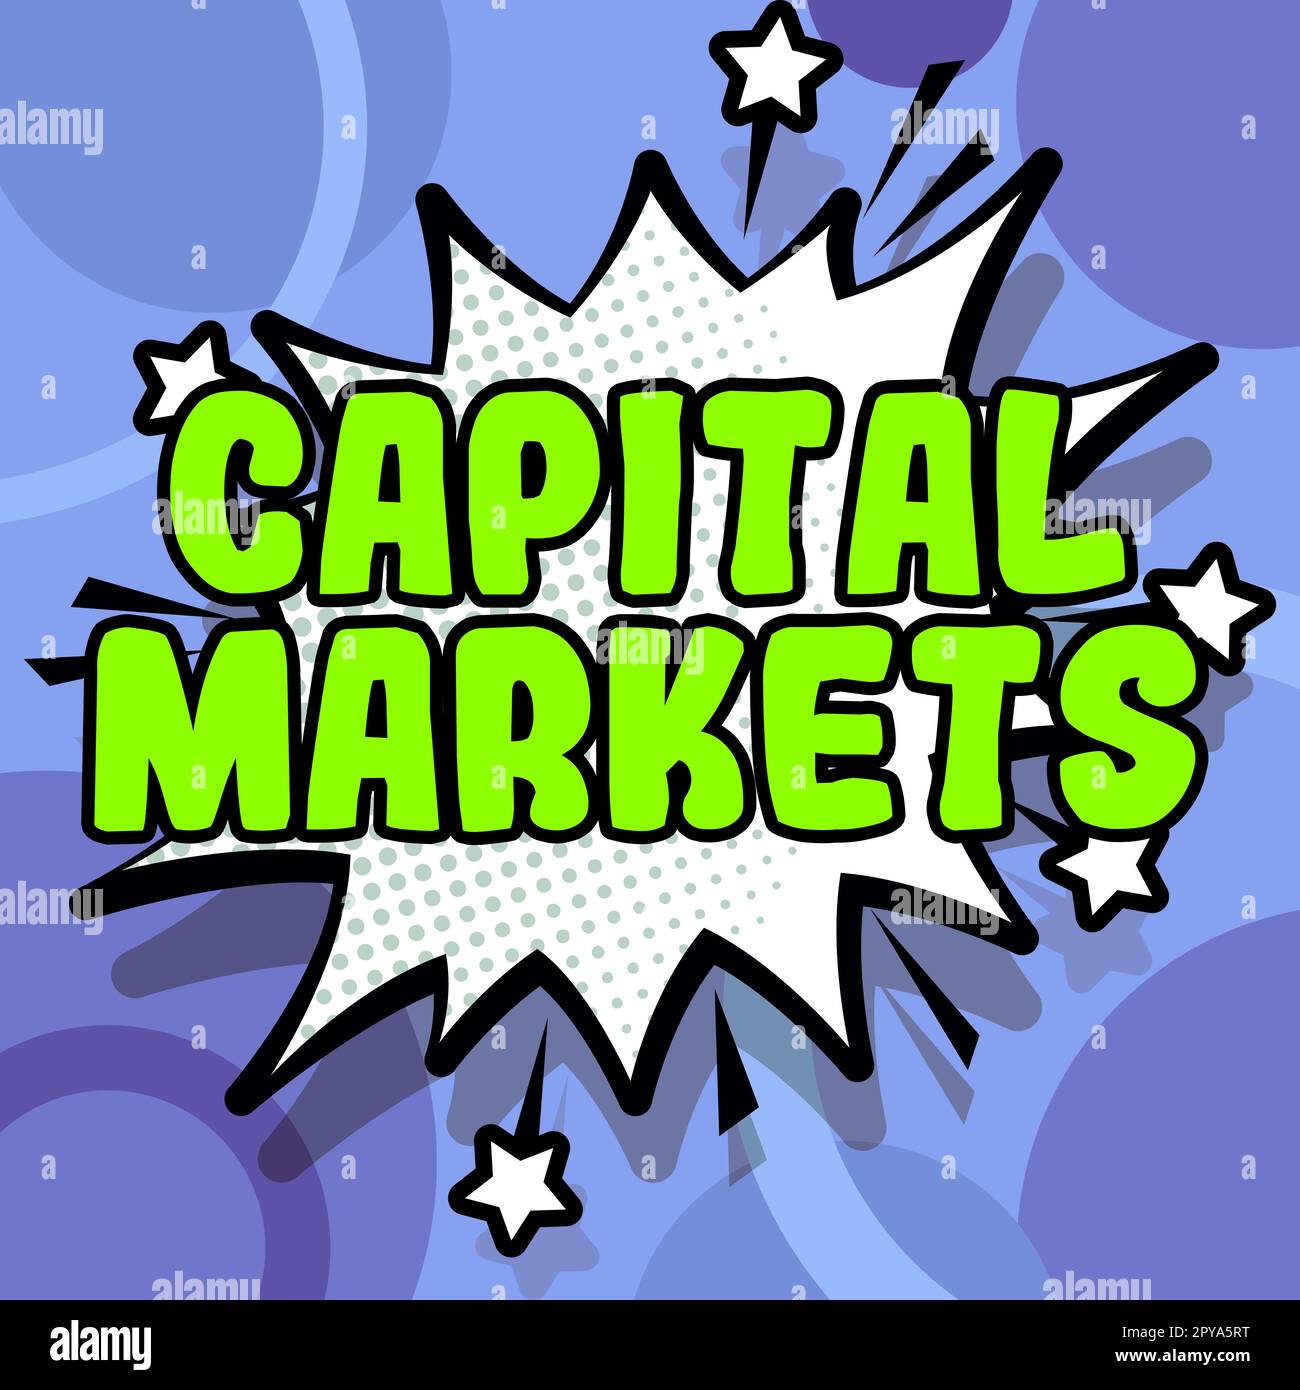 Inspiration showing sign Capital Markets. Business concept Allow businesses to raise funds by providing market security Stock Photo